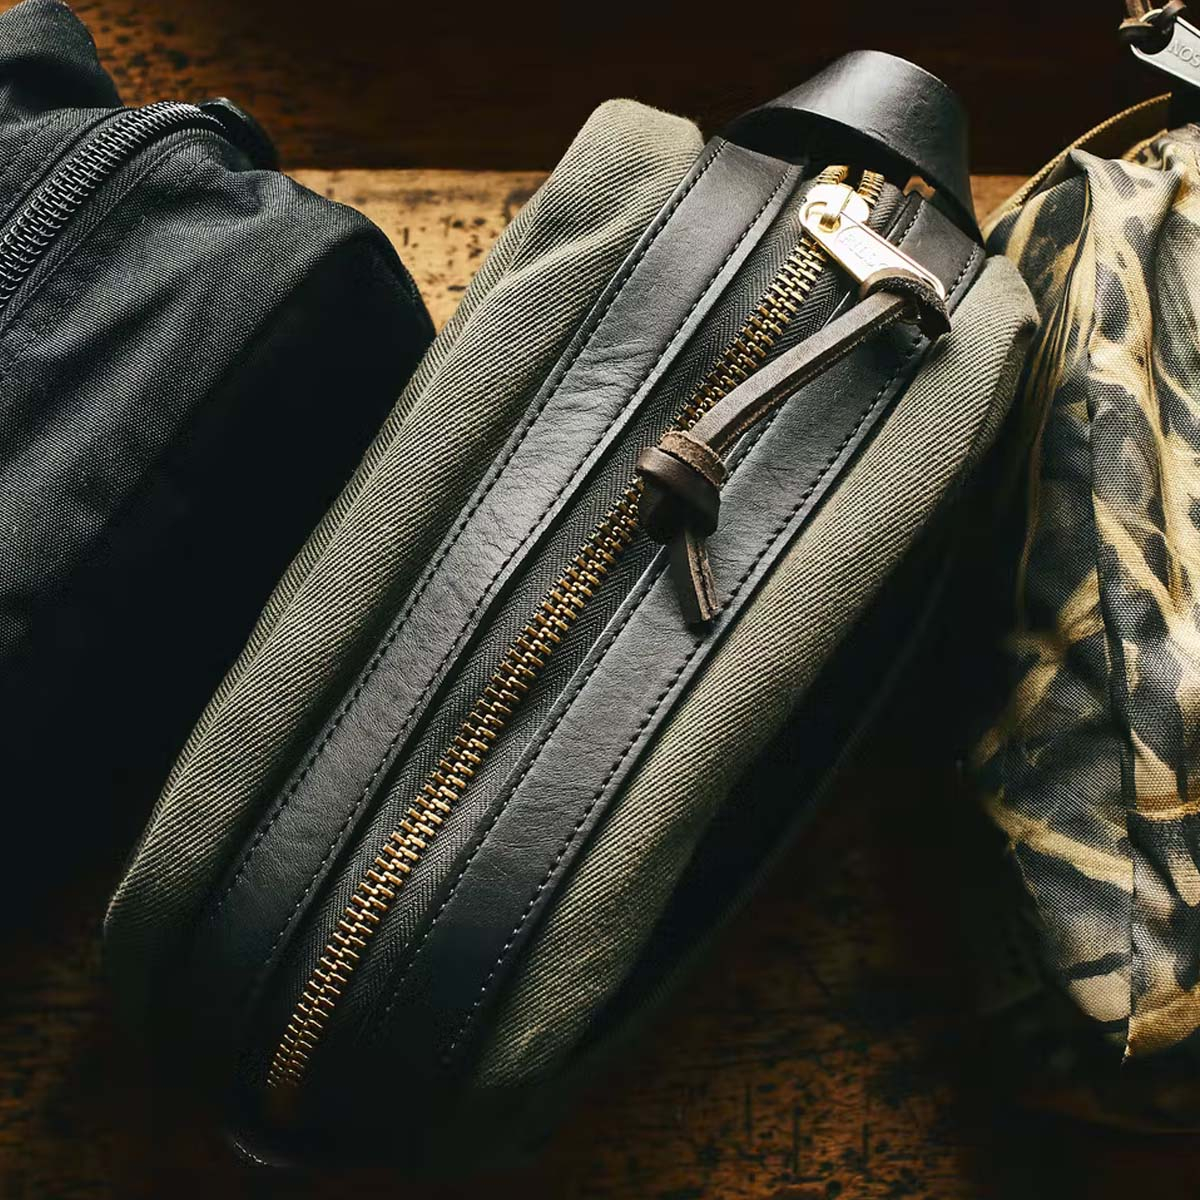 Filson Travel Kit Otter Green, the most rugged shave kit on the market